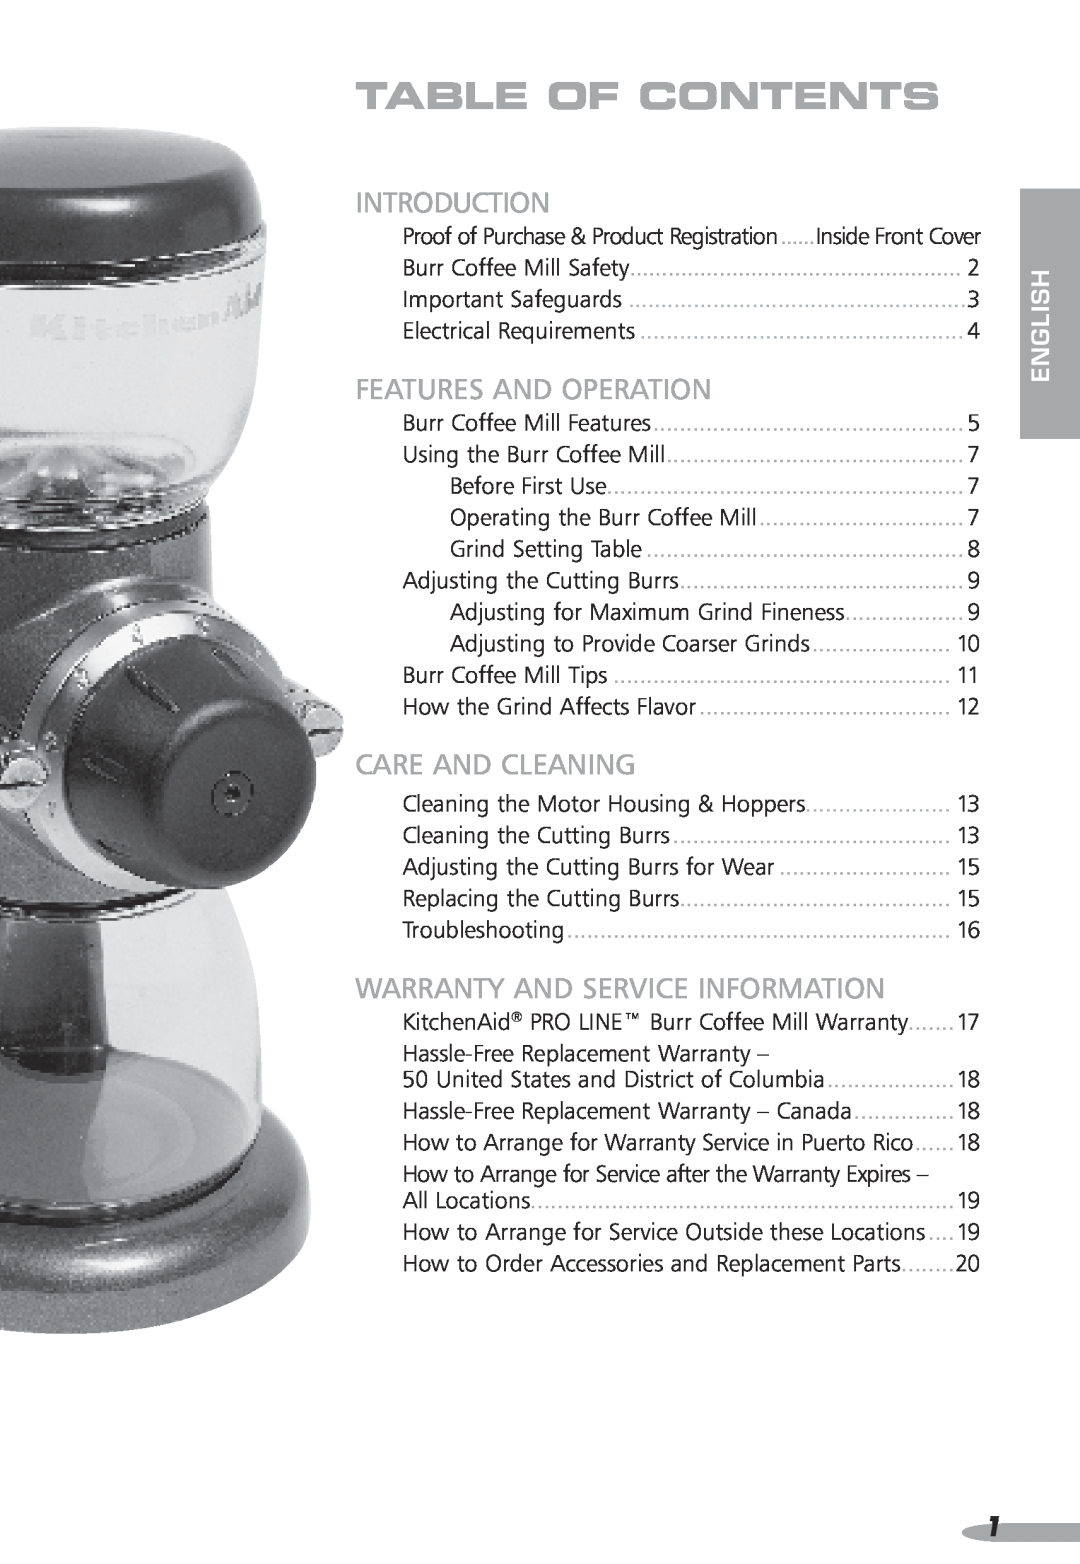 KitchenAid PRO LINE Table of contents, Introduction, Features and Operation, Care and Cleaning, Burr Coffee Mill Safety 